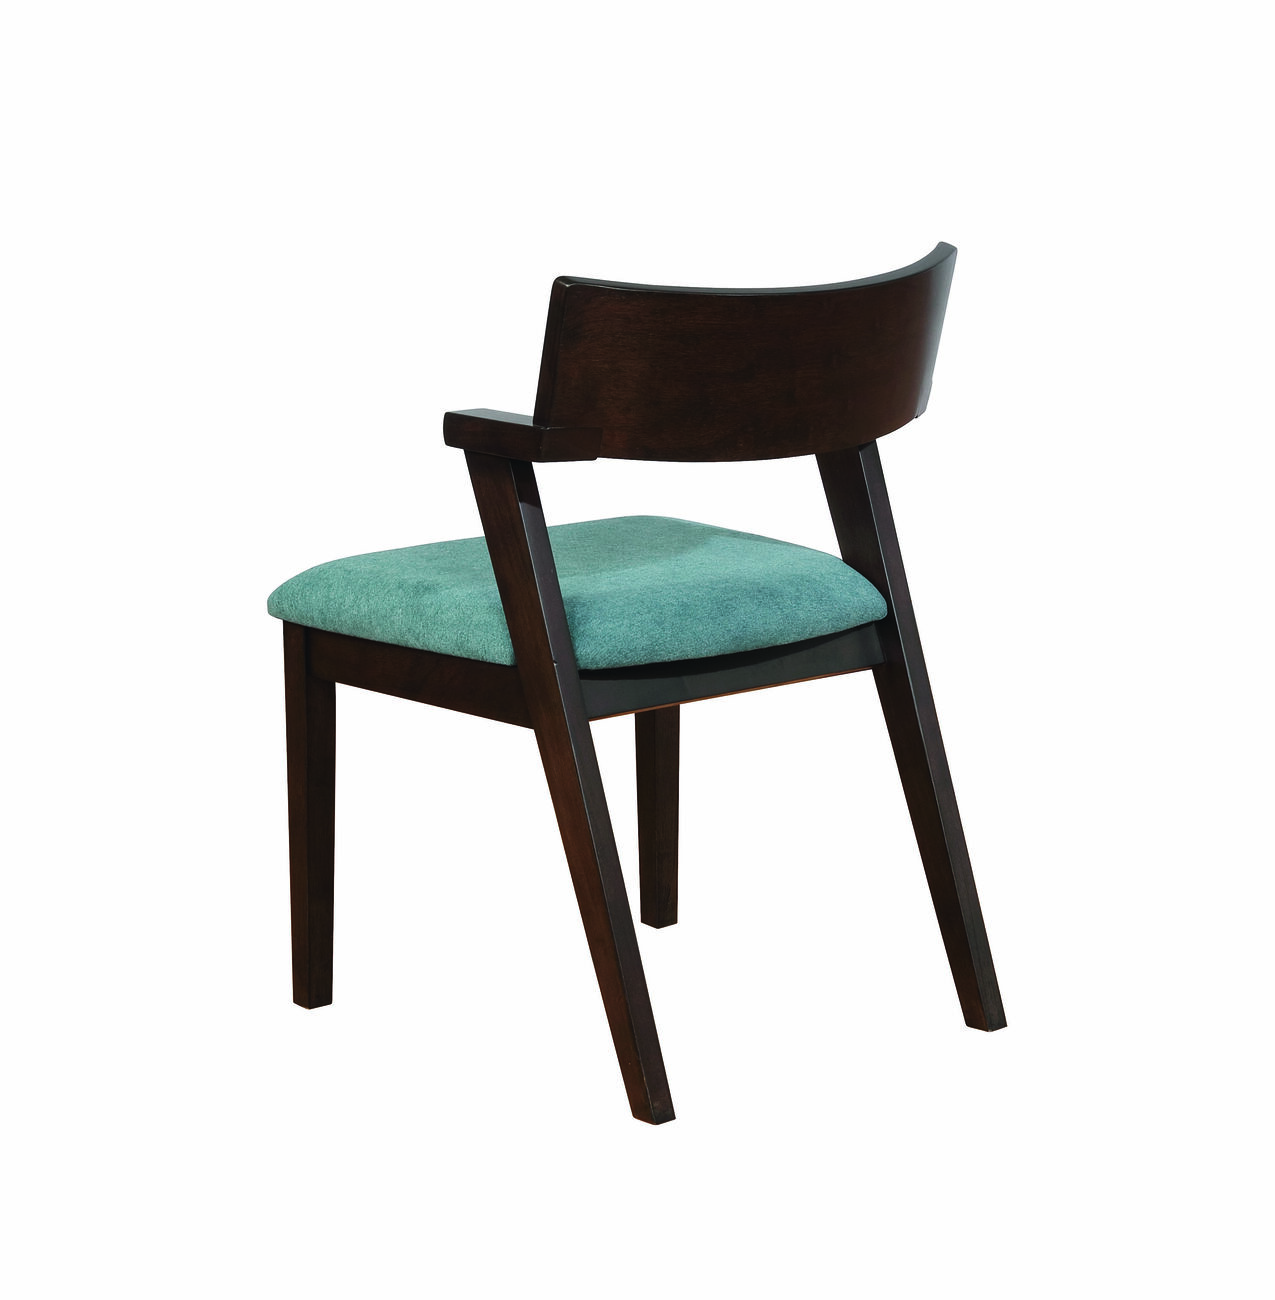 Wooden Dining Chair with Fabric Upholstered Padded Seat, Teal Blue and Brown, Set of Two